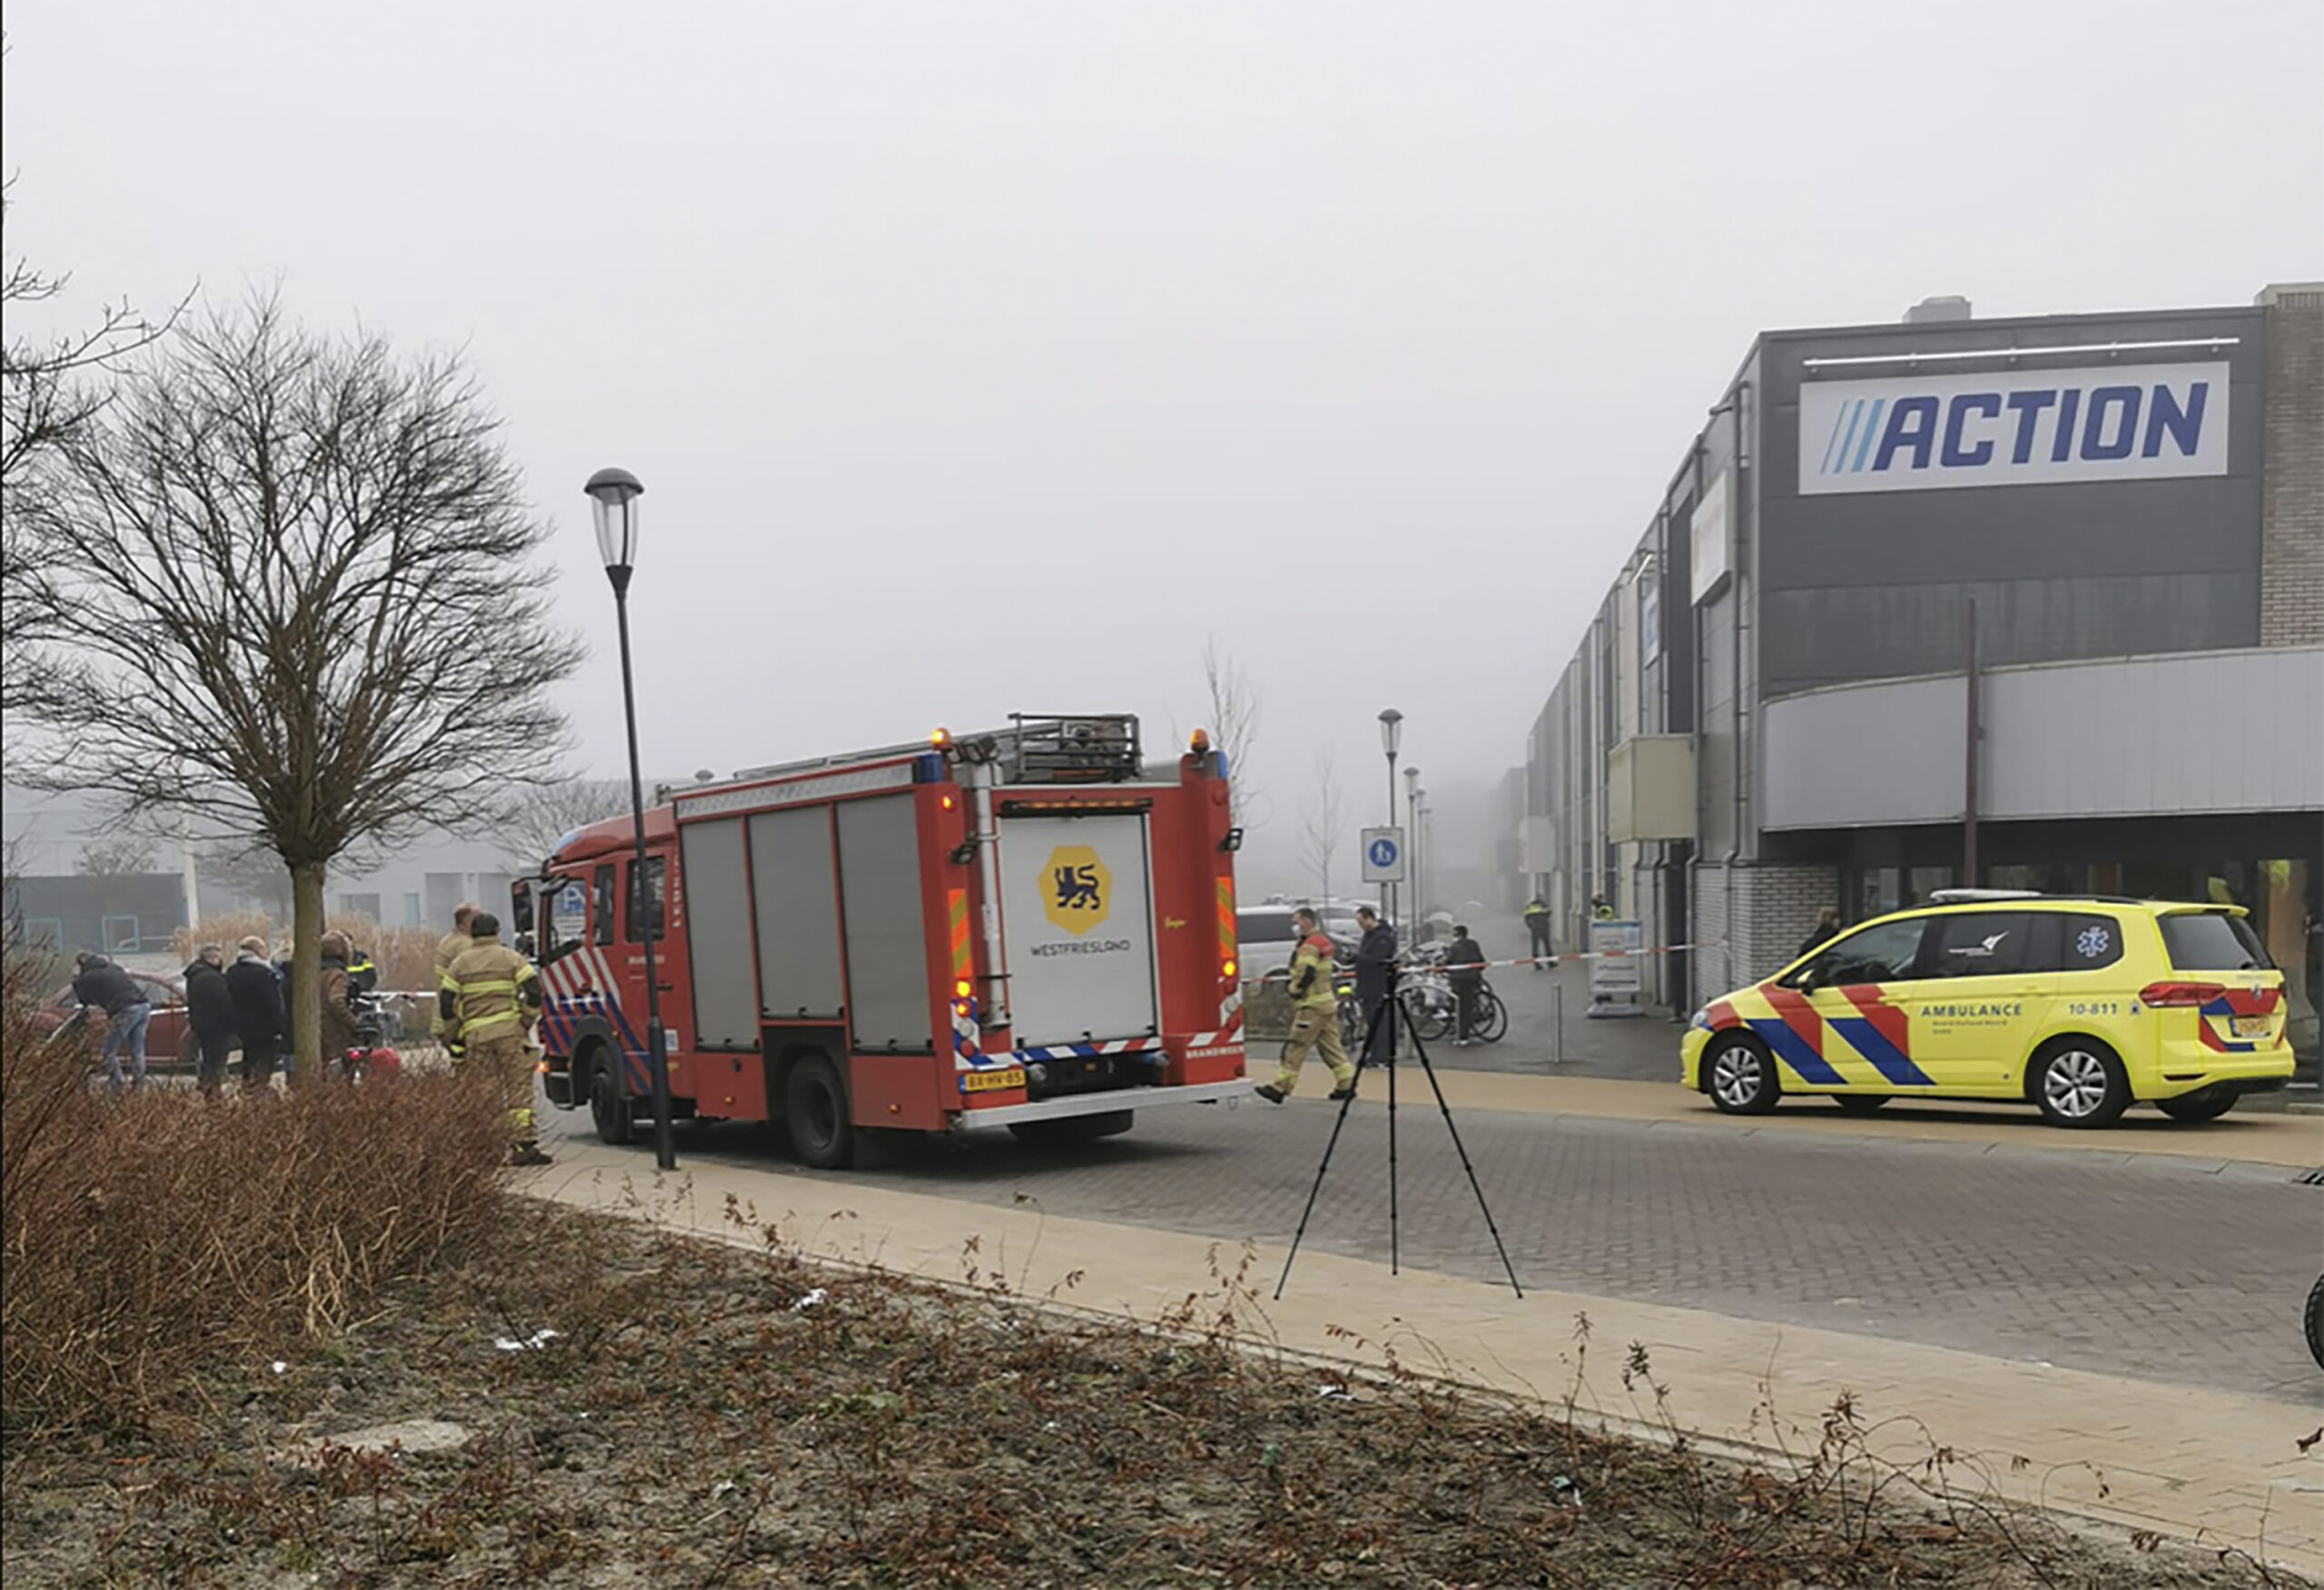 Emergency services attend the scene close to a coronavirus test station after a homemade firework was detonated in Bovenkarspel, Netherlands, Wednesday March 3, 2021. The homemade firework, a so-called "pipe" firework, was fired near to the Covid test station Wednesday and broke some windows but no people are reported injured. (Stefanie ter Koele / AP)